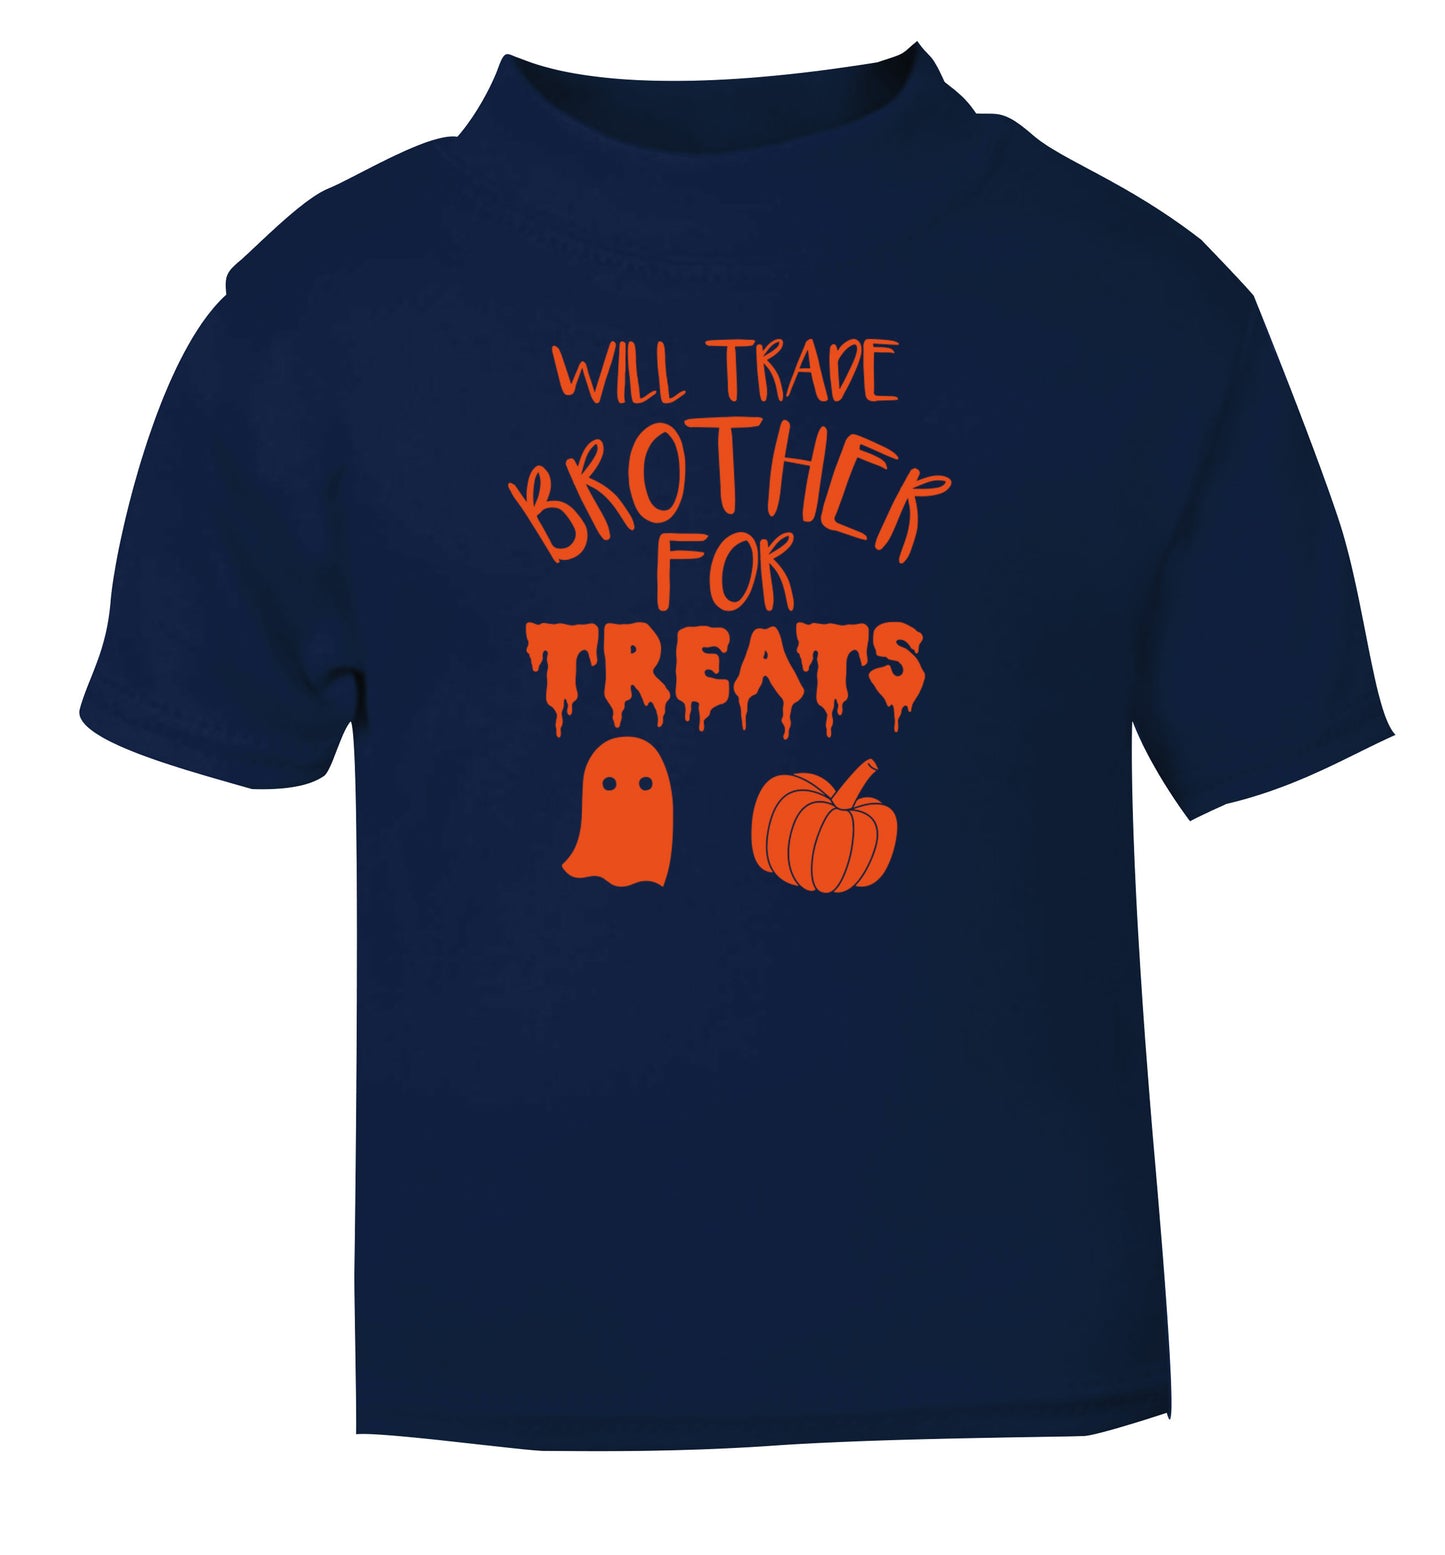 Will trade brother for treats navy Baby Toddler Tshirt 2 Years